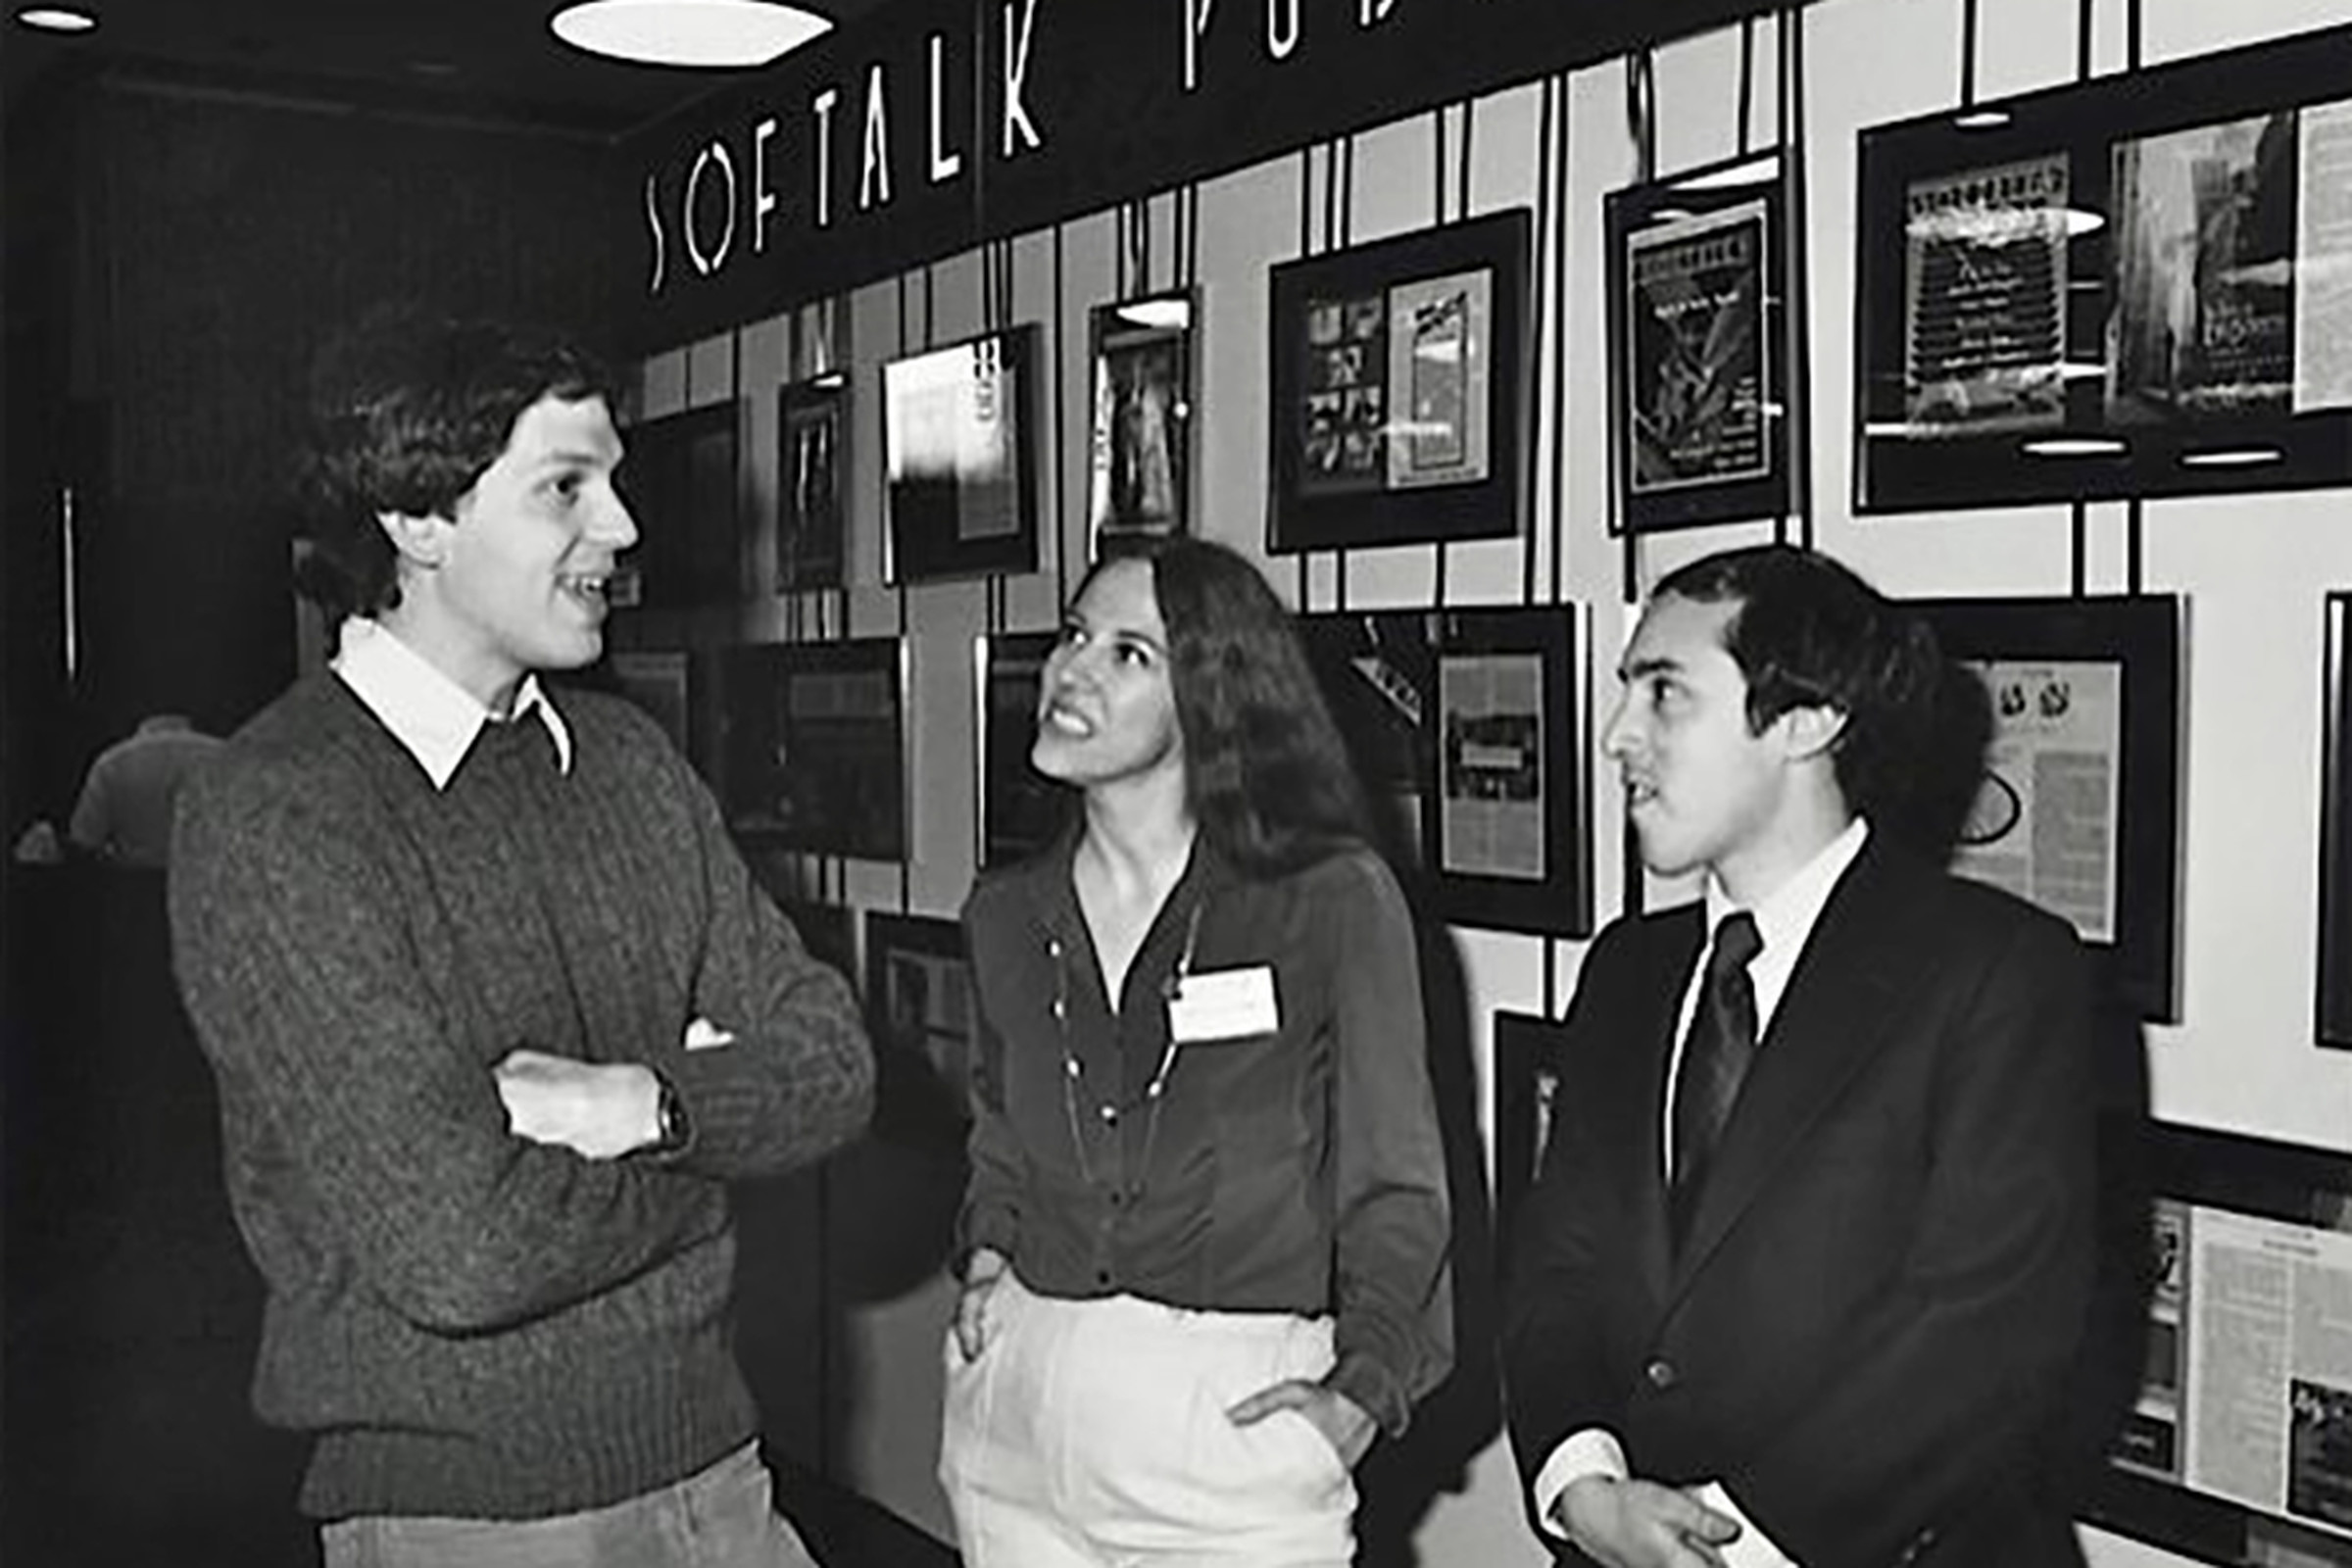 Margot Comstock, dressed in a silk shirt and pale trouses, stands between two men, Marc Blank, and Joel Berez. The image is black and white.